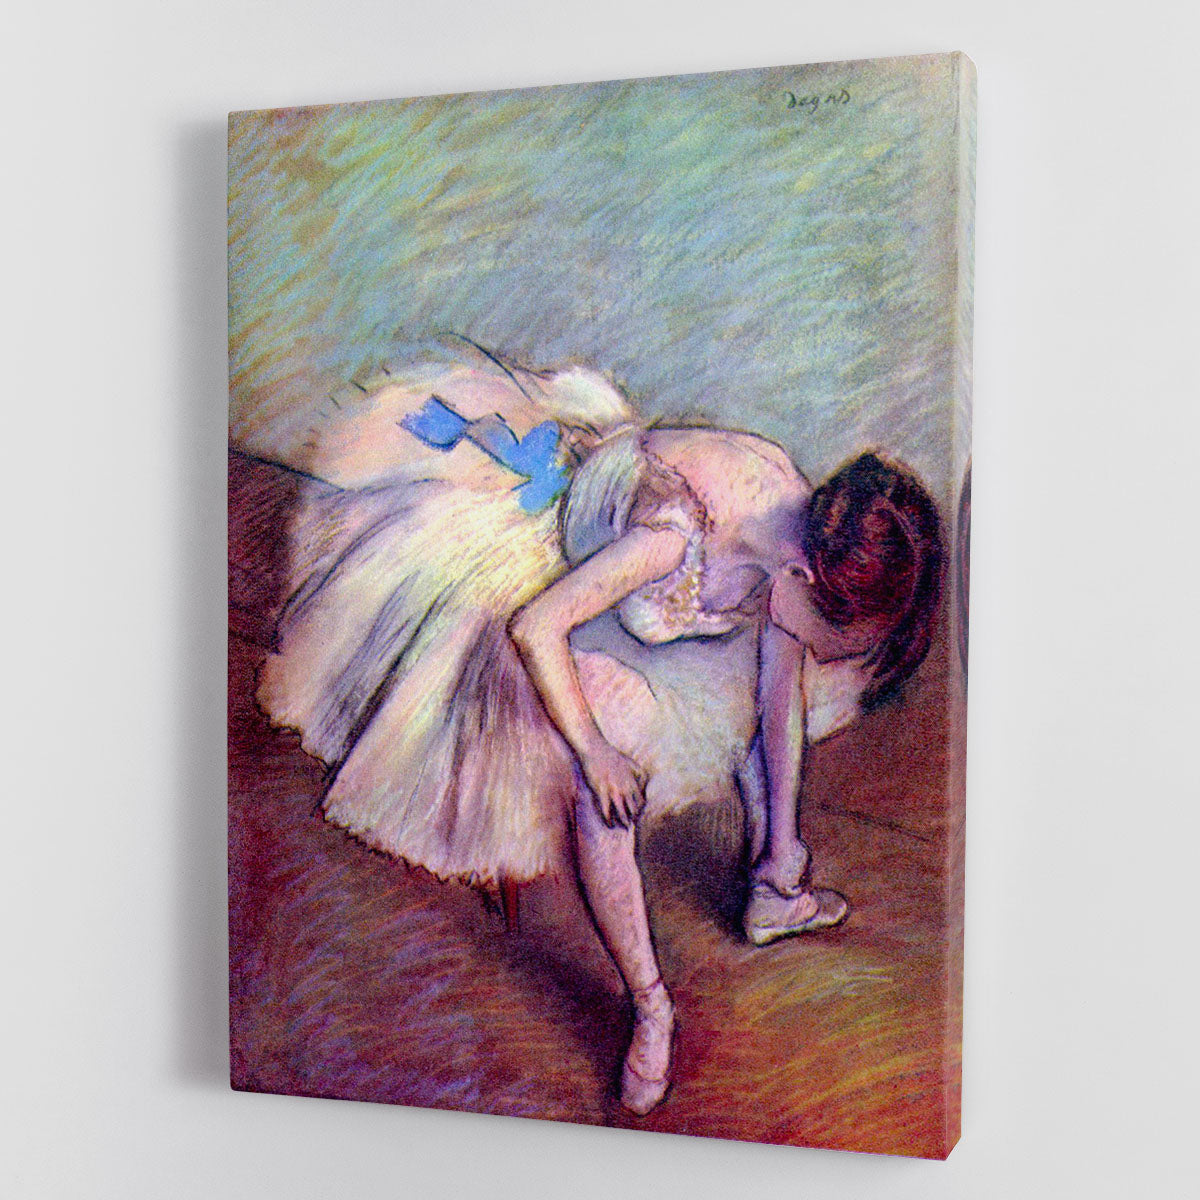 Dancer bent over by Degas Canvas Print or Poster - Canvas Art Rocks - 1